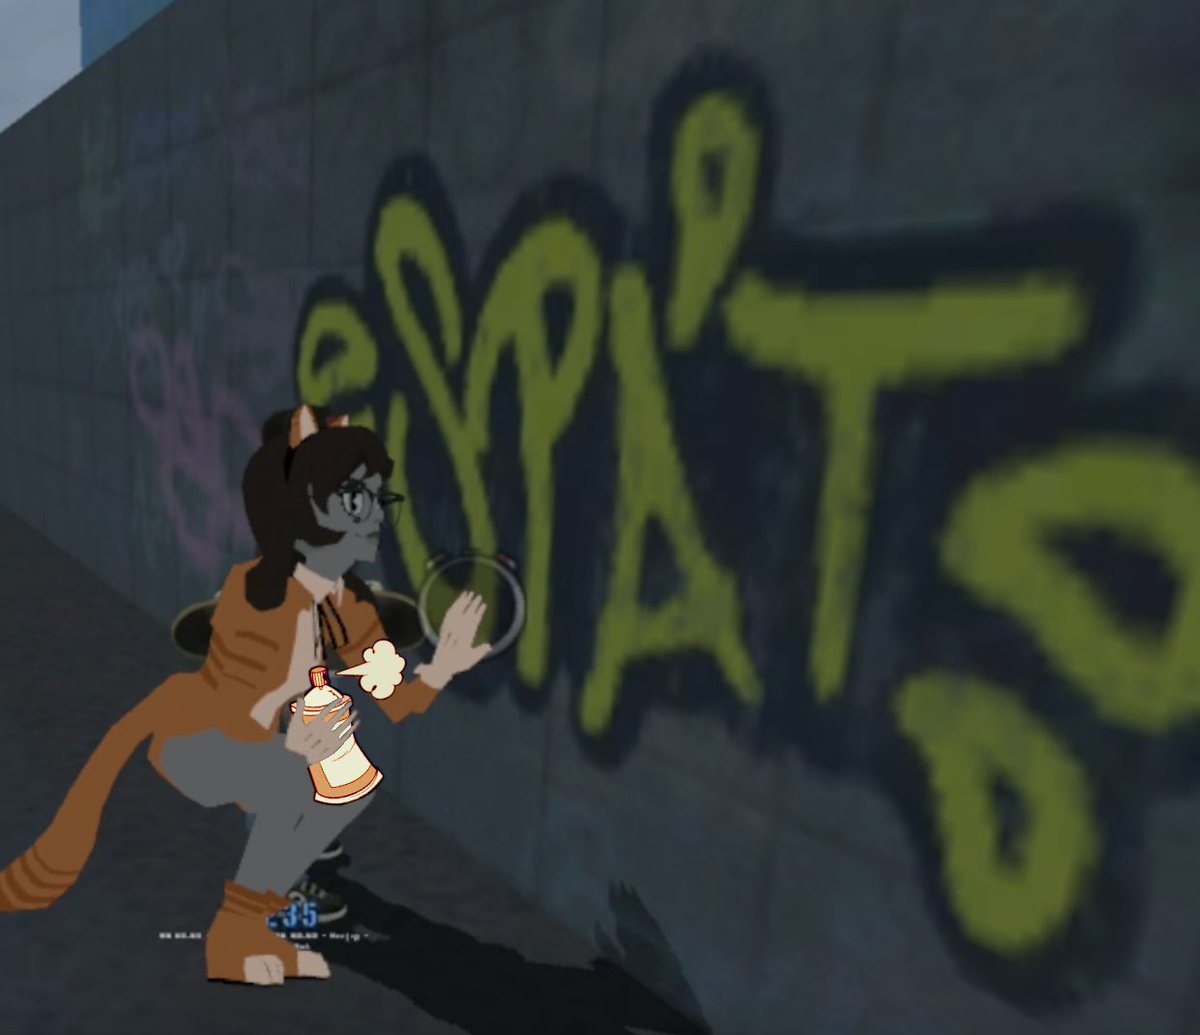 Good Evening~
Meet me tonight, 9 PM PST @ the Kingspray spot, lets paint some walls